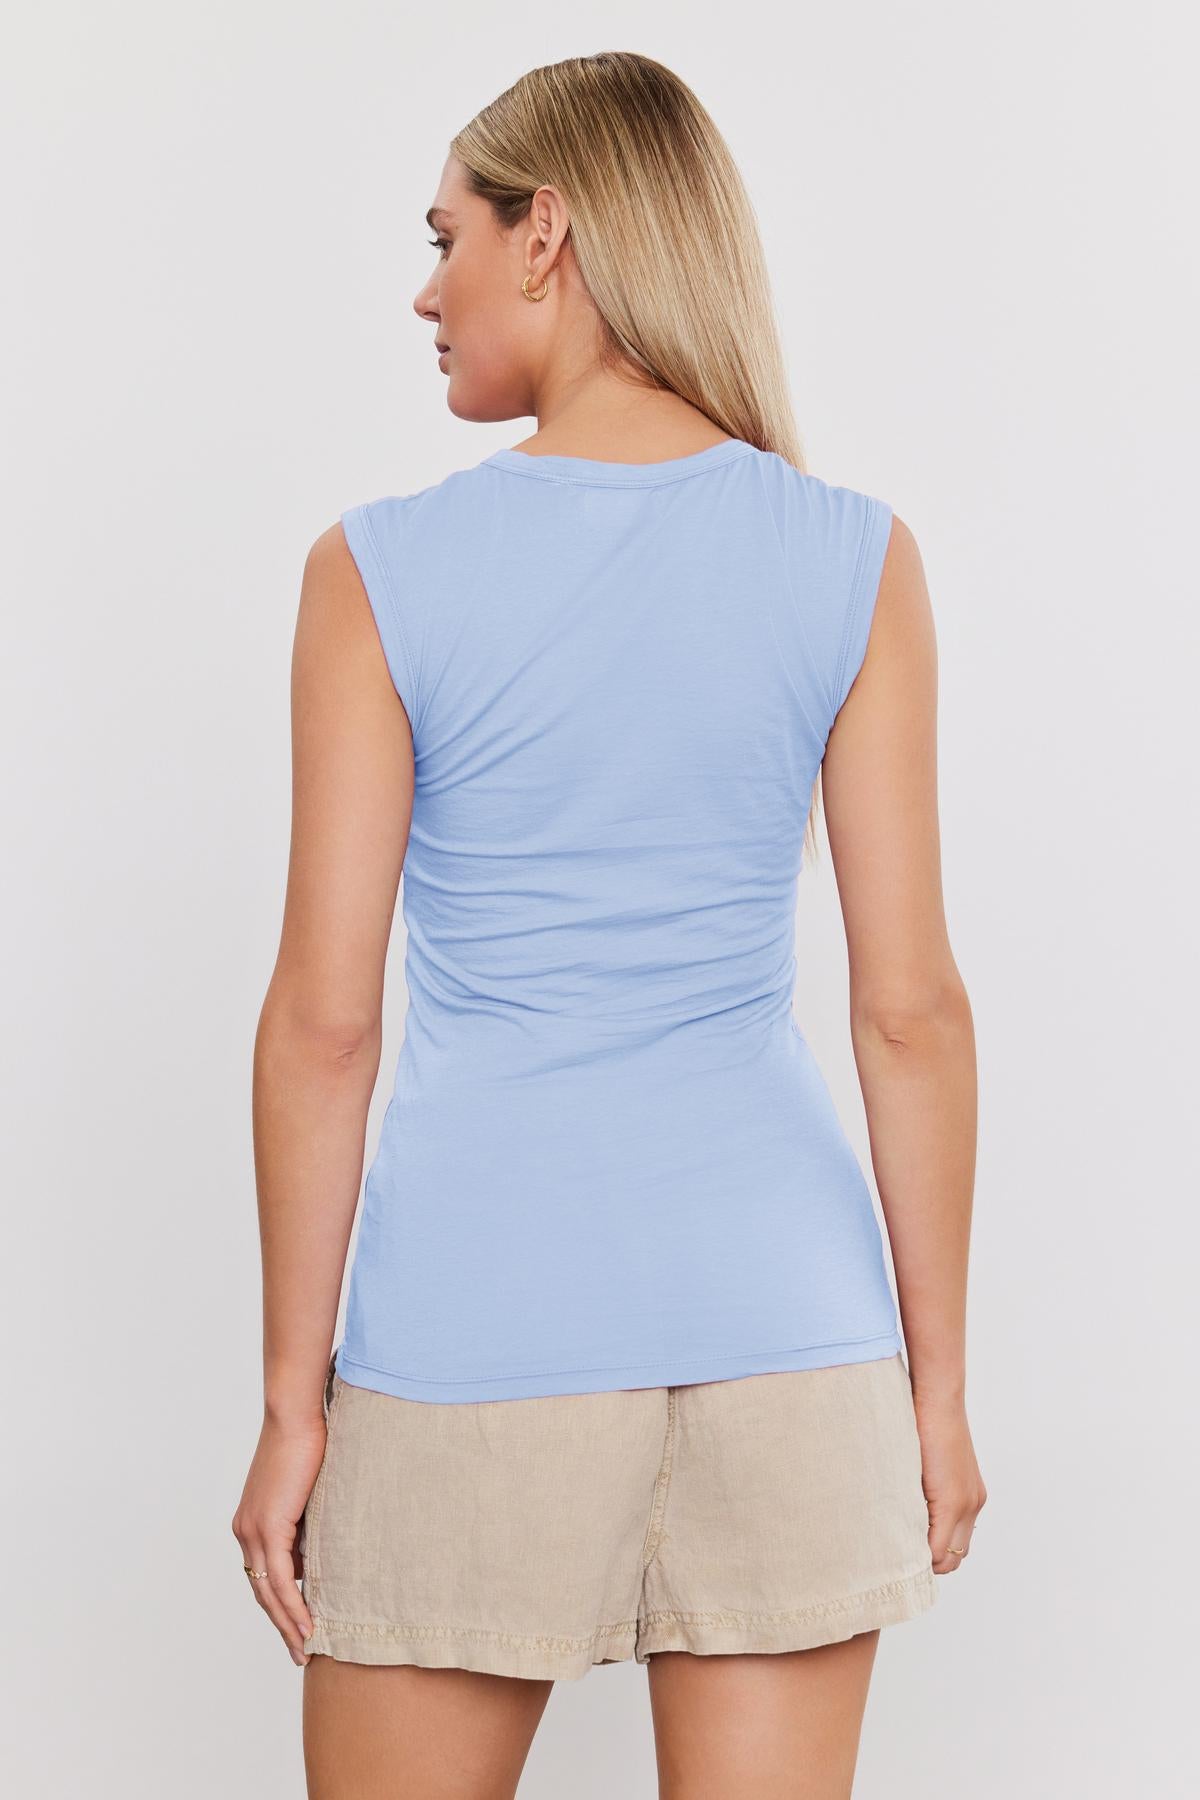   A woman viewed from the back, wearing a blue ESTINA GAUZY WHISPER FITTED TANK TOP and beige shorts, standing against a white background. Brand Name: Velvet by Graham & Spencer 